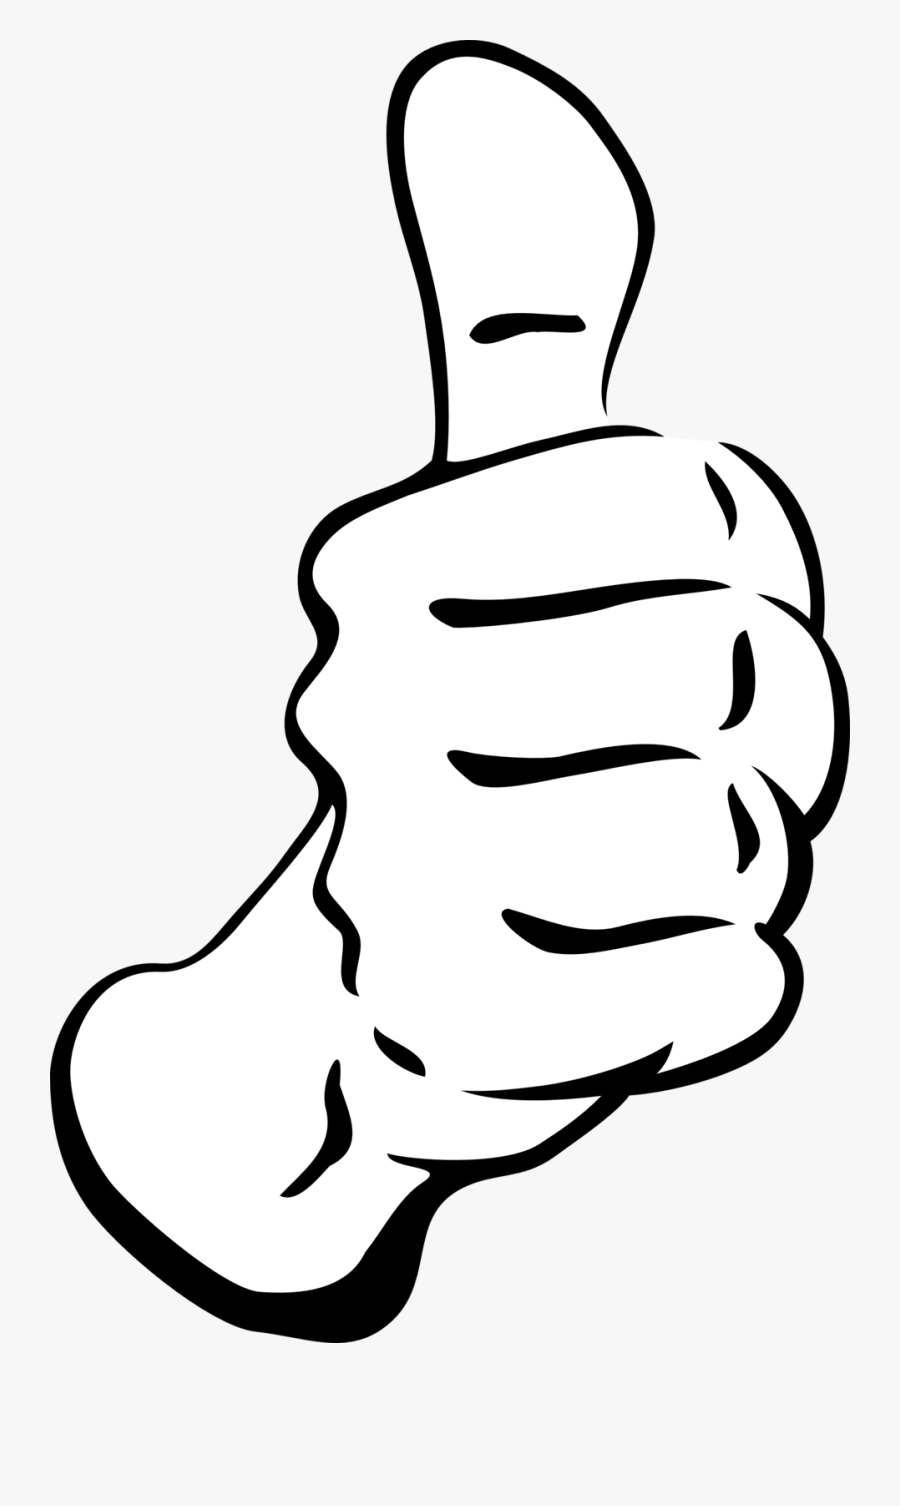 Thumbs Up Transparent - Thumbs Up Outline Png, Transparent Clipart